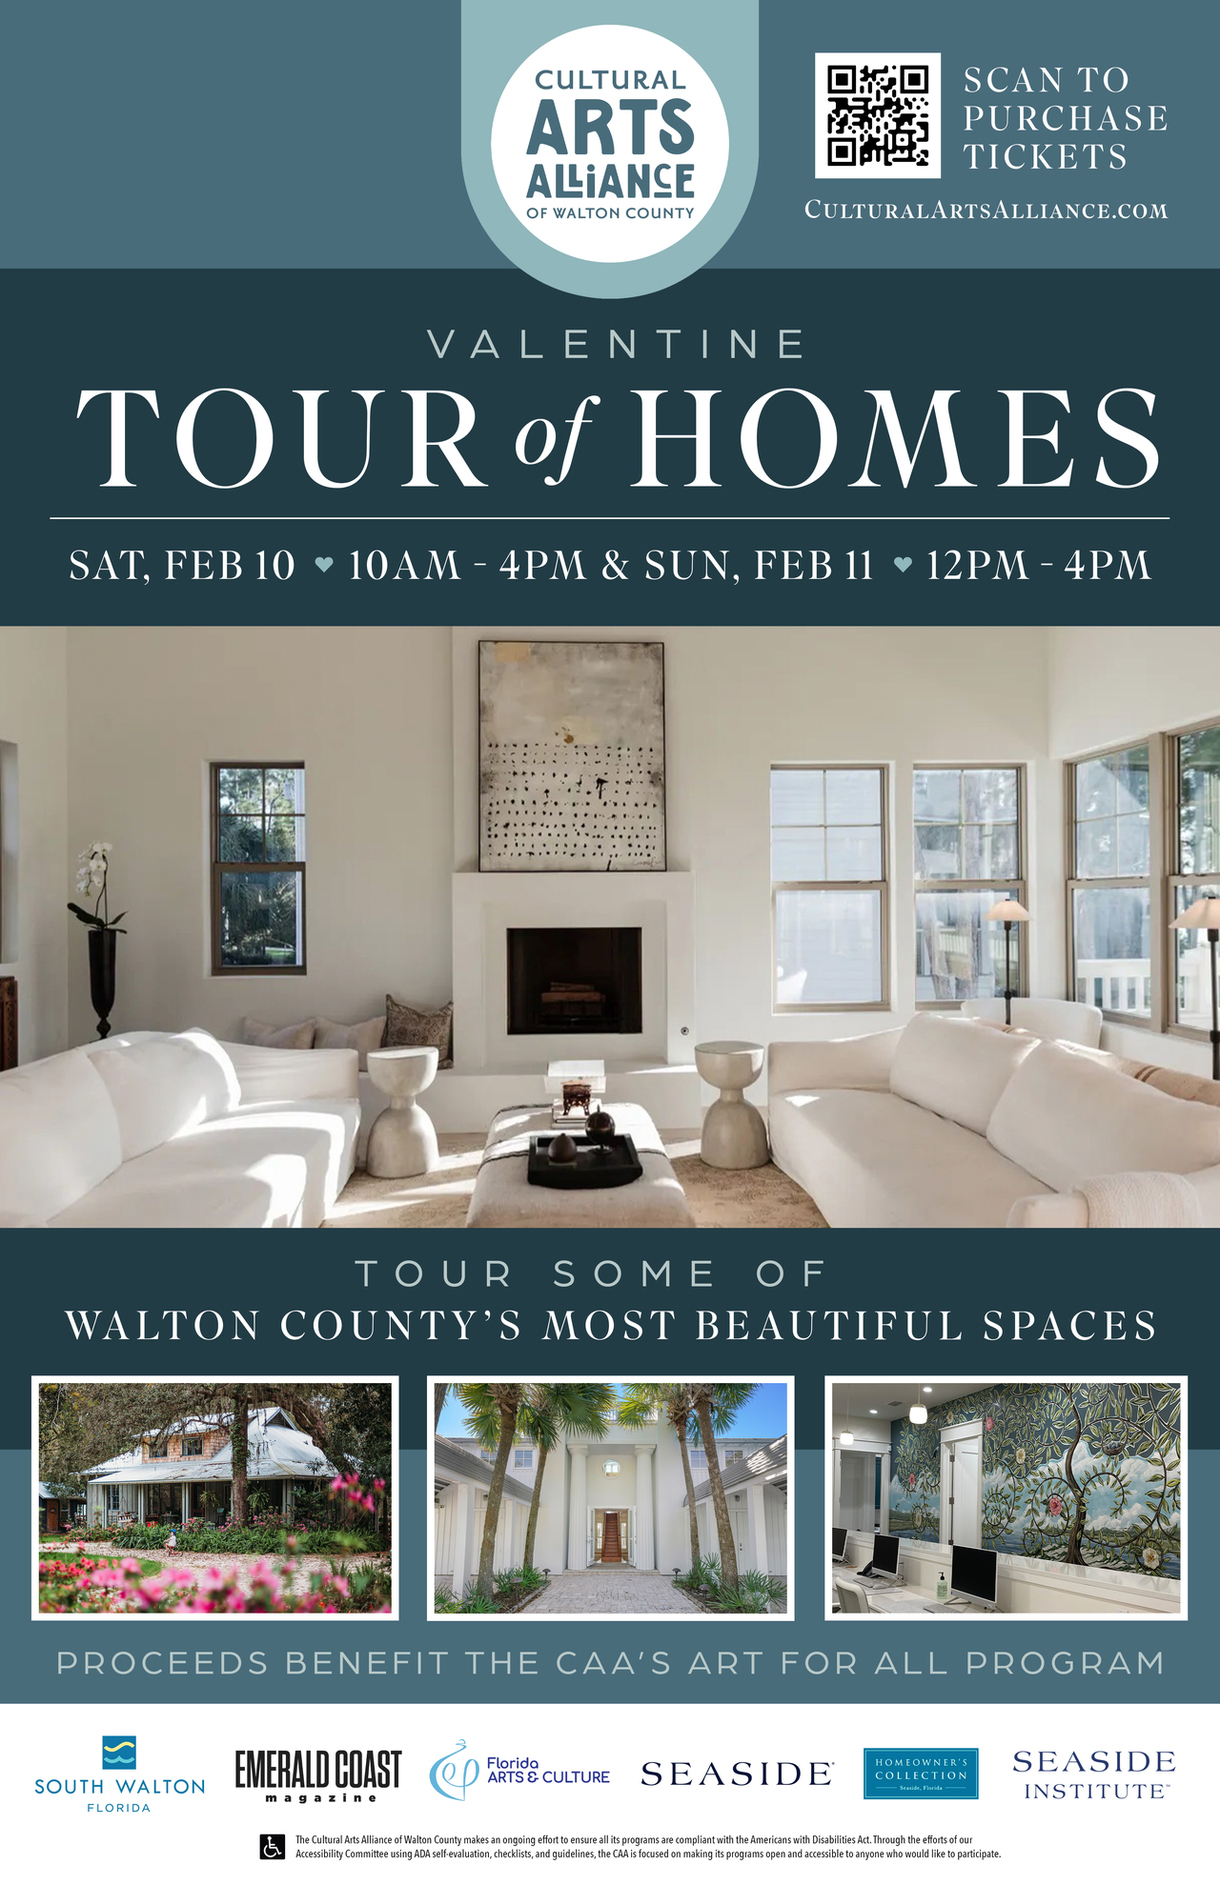 CULTURAL ARTS ALLIANCE OF WALTON COUNTY’S ANNUAL TOUR OF HOMES